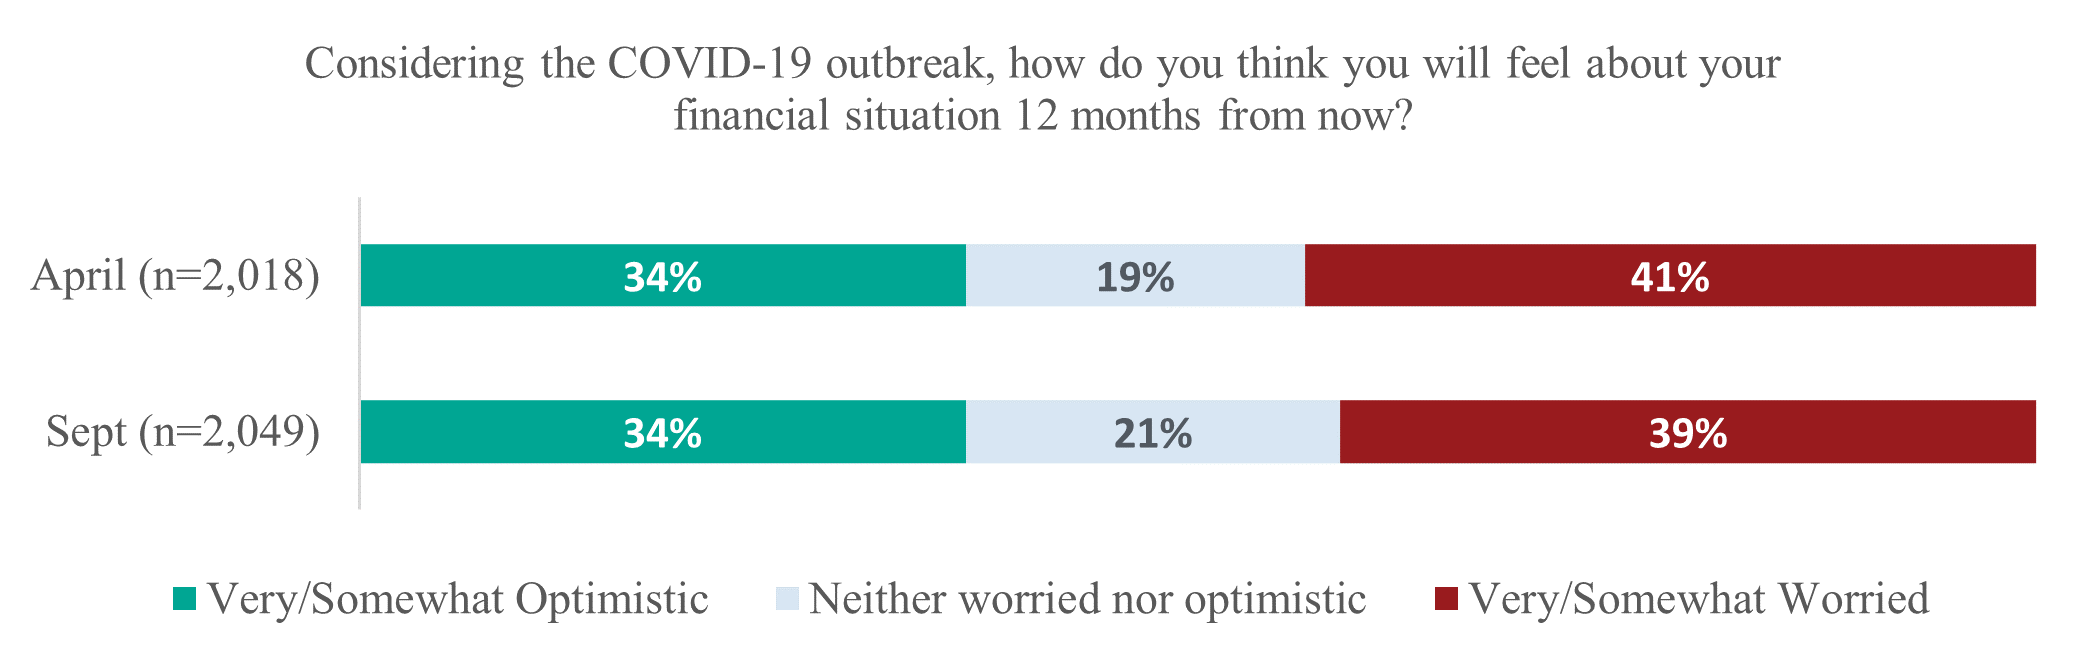 COVID outbreak feelings about financial situation 12 months from now